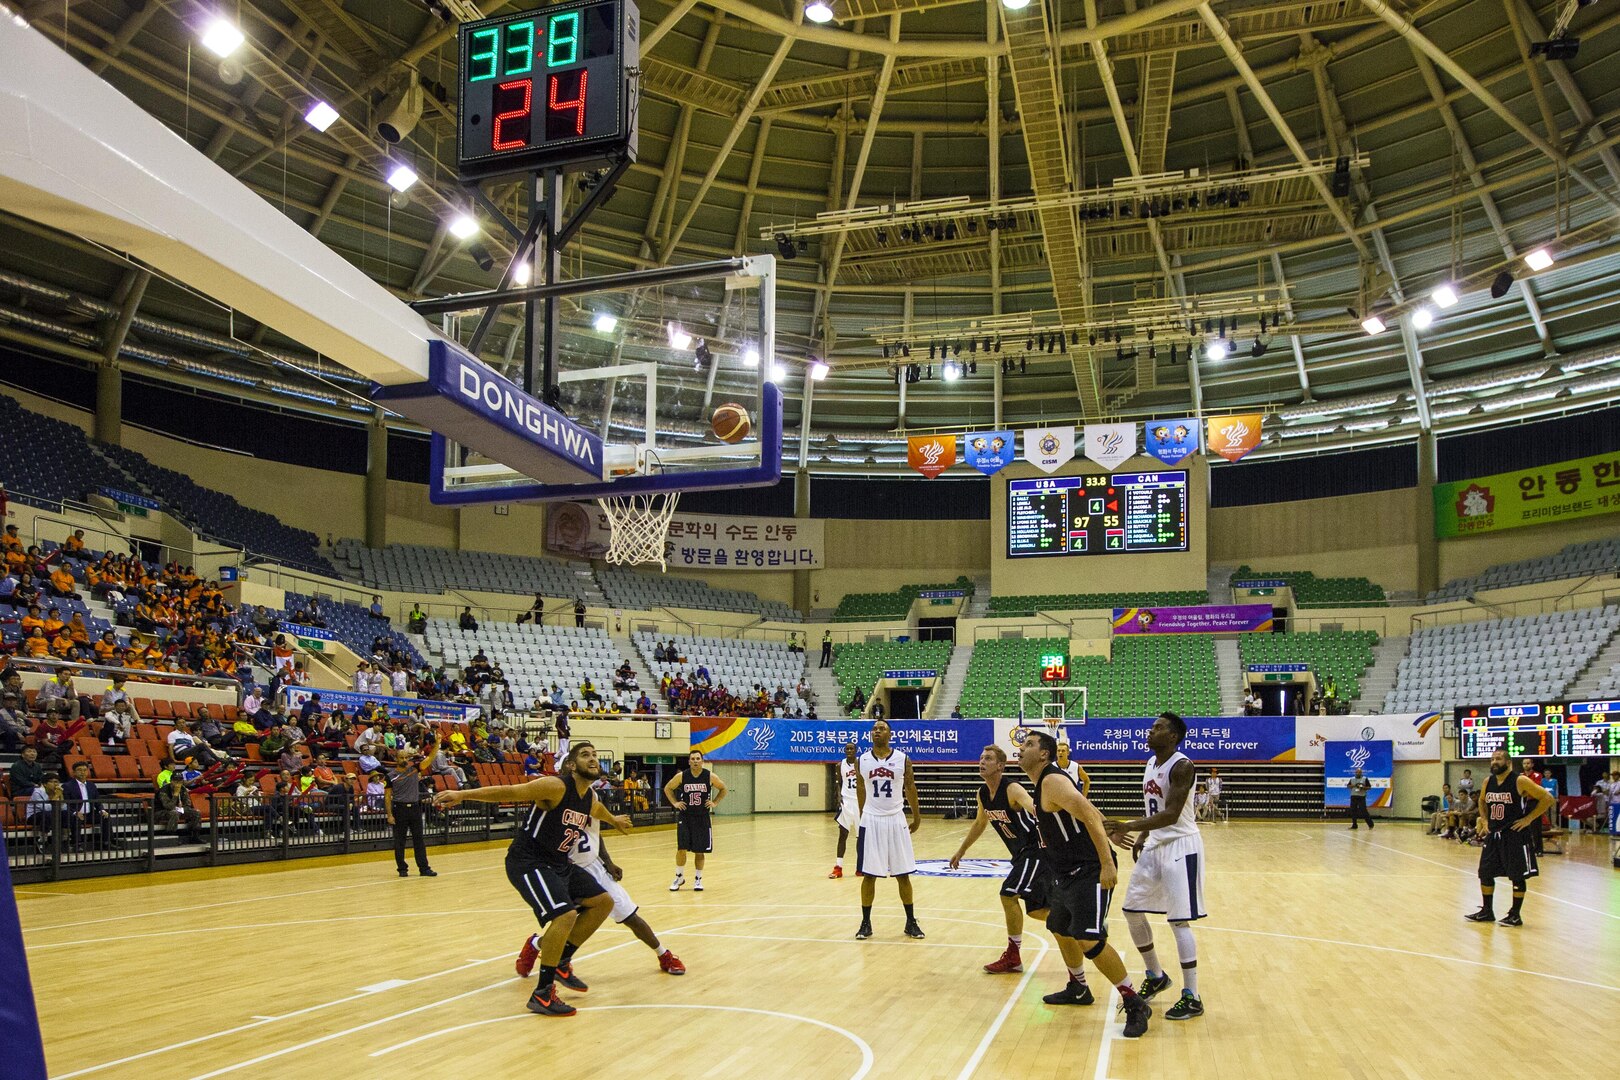 U.S. Men's Basketball team vs. Canada Men’s Basketball team. The CISM World Games provides the opportunity for the athletes of over 100 different nations to come together and enjoy friendship through sports. The sixth annual CISM World Games are being held aboard Mungyeong, South Korea, Sept. 30 - Oct. 11.